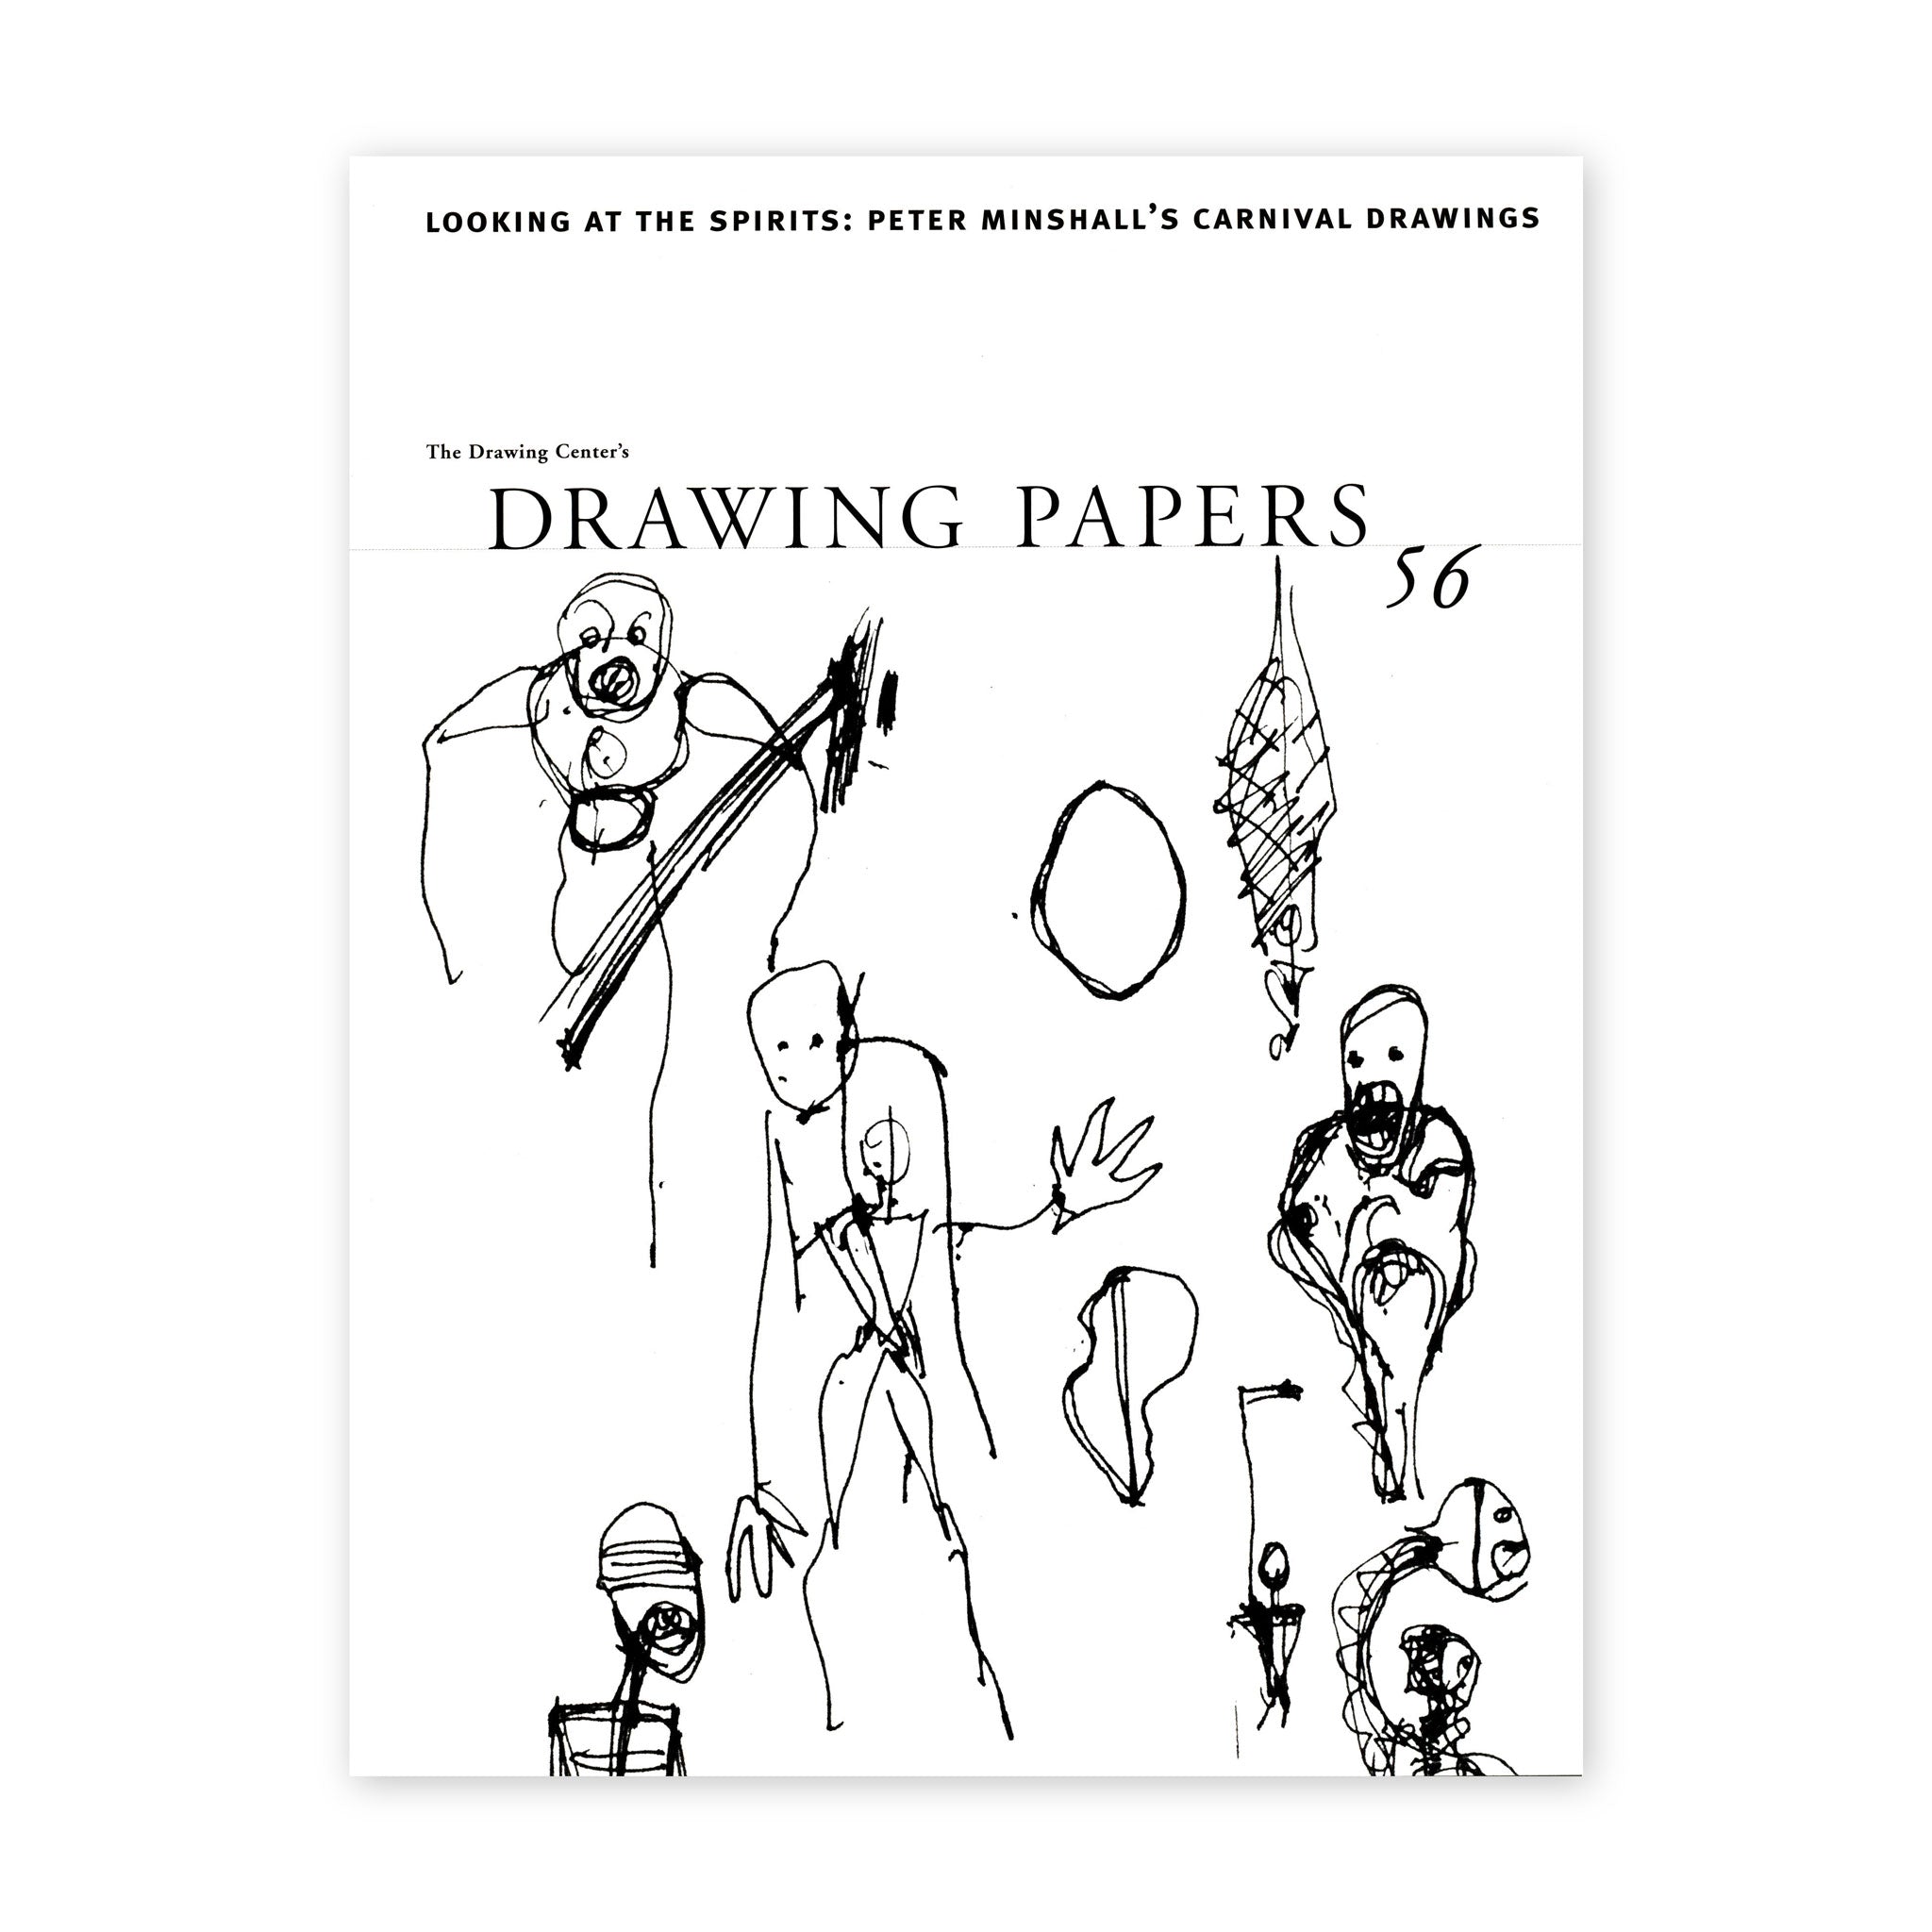 Front cover for "Looking at the Spirits: Peter Minshall's Carnival Drawings"